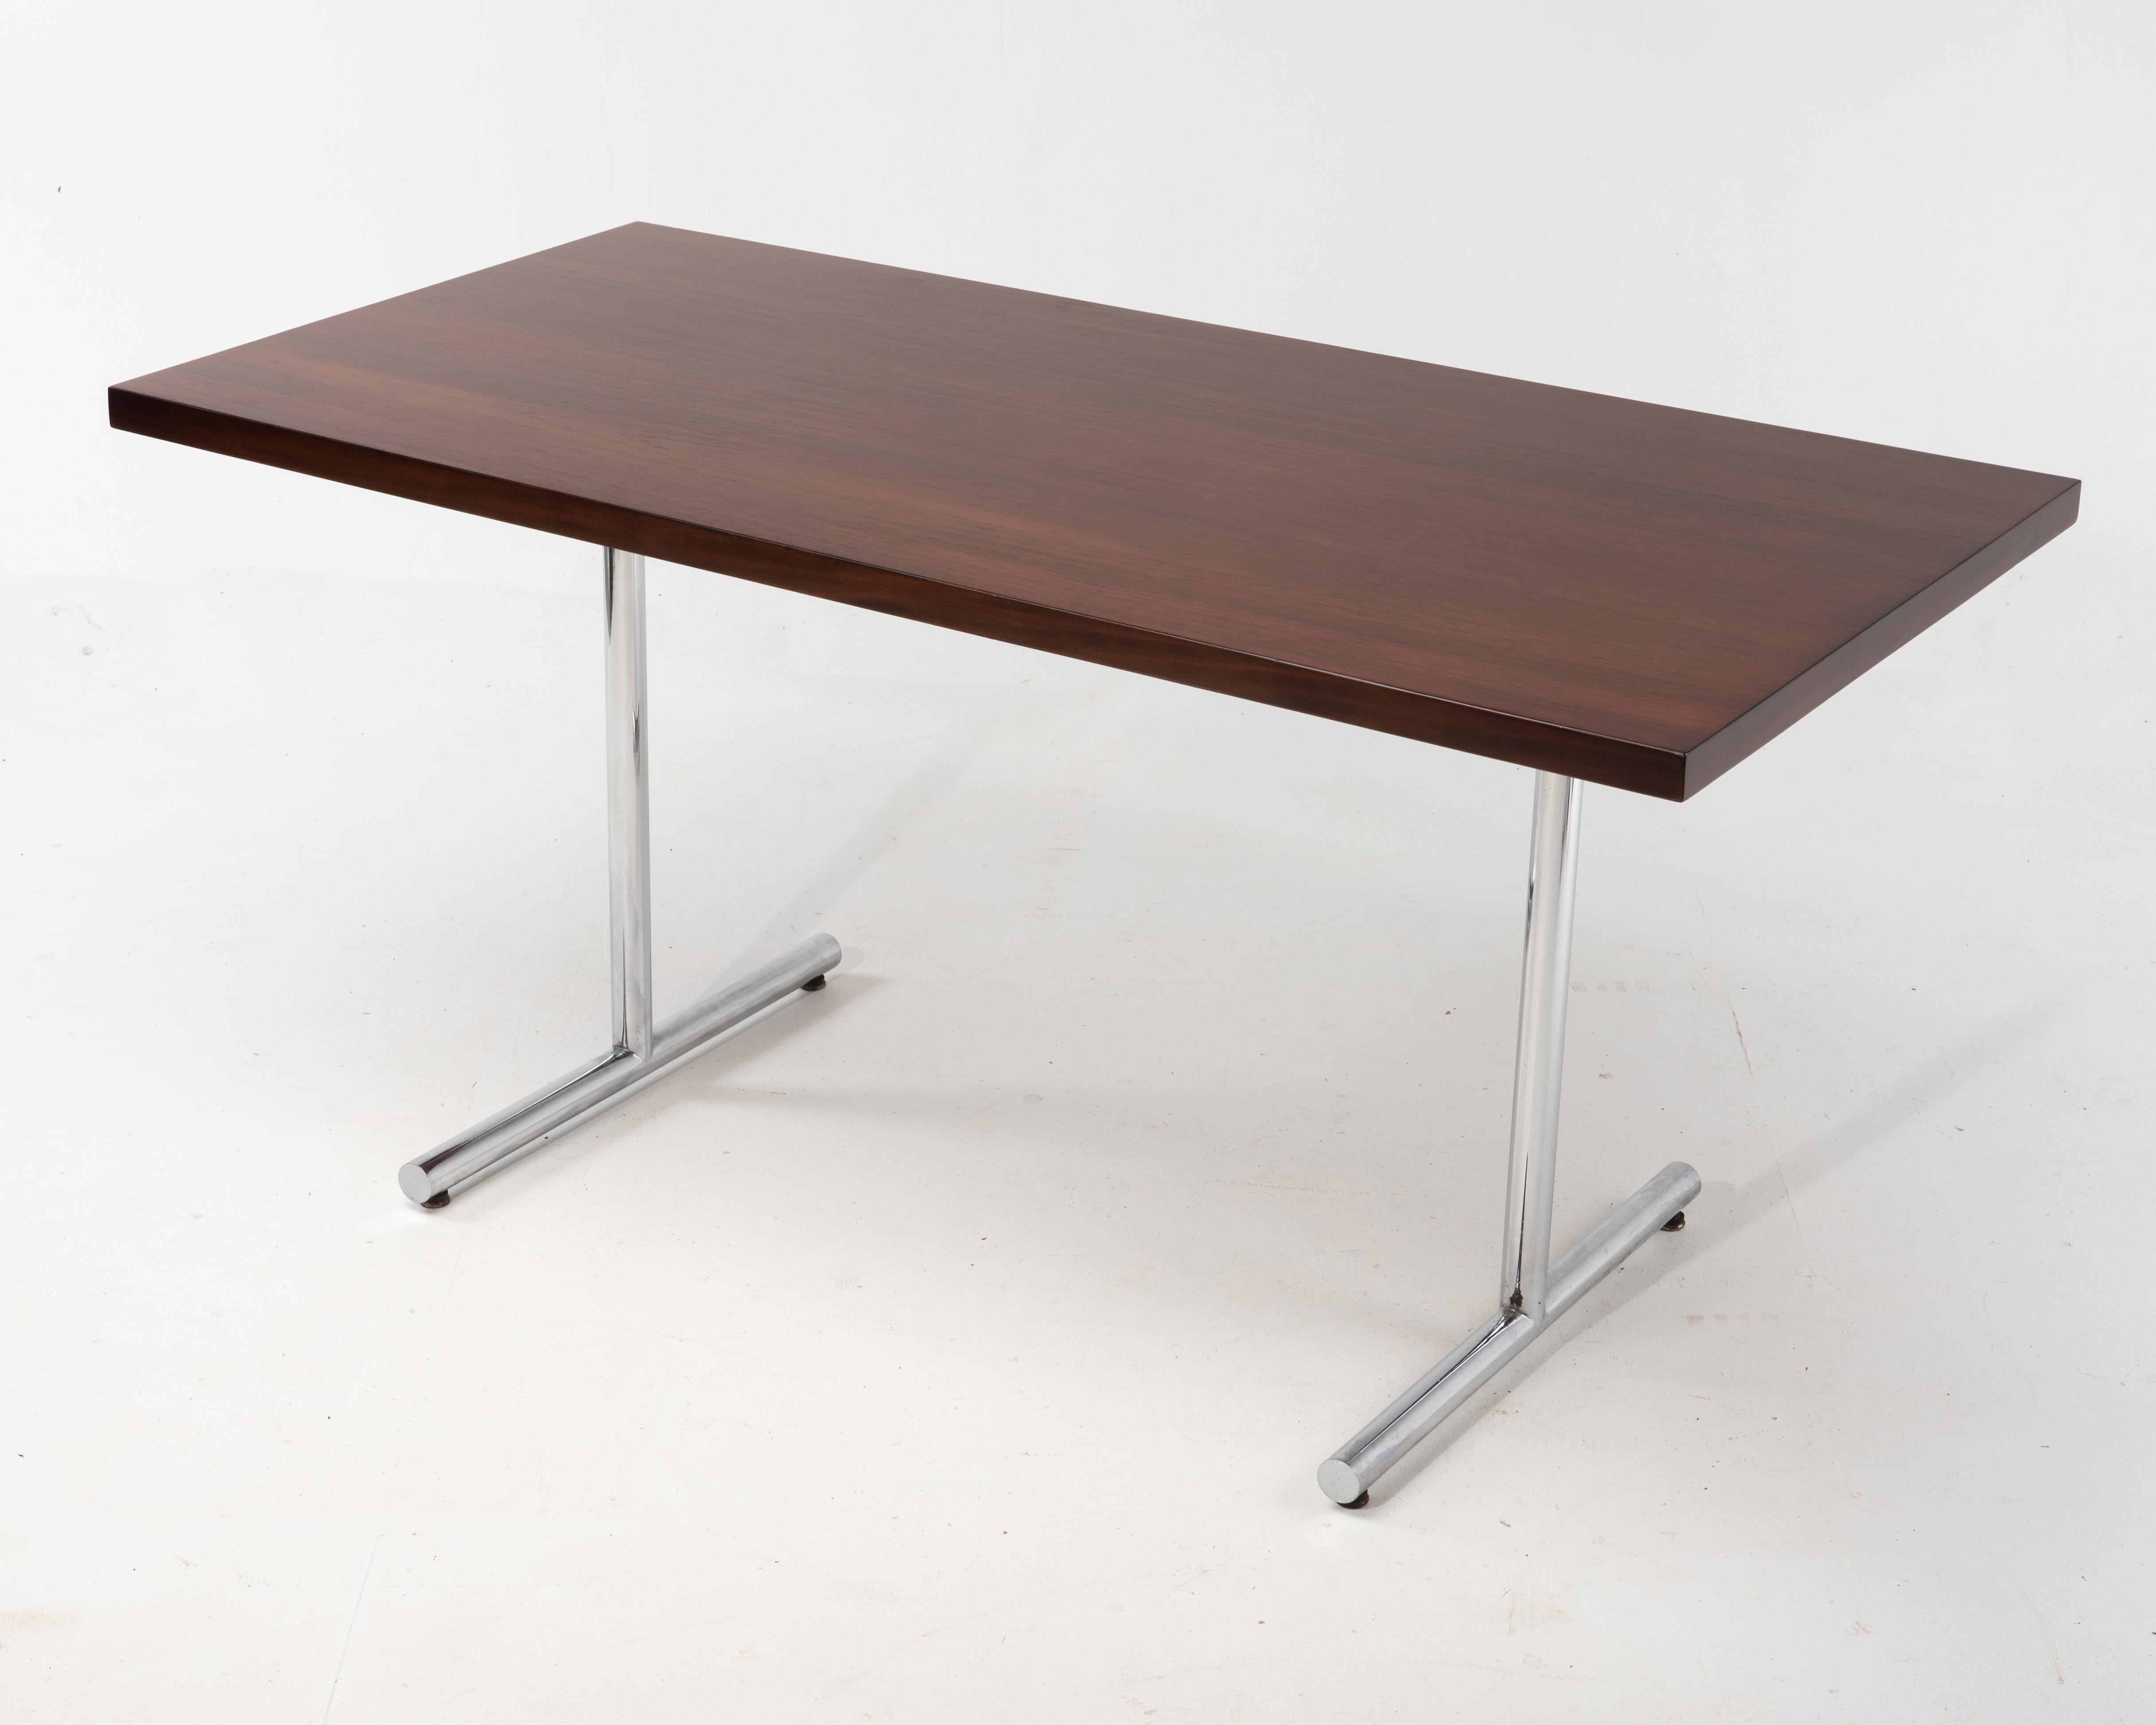 A chrome and rosewood desk from the 1970s. Beautifully book matched top. One single drawer in the center, if removed the desk would make a wonderful dining table. The tag is shown, but we do not see any makers name, nor does it help us attribute it